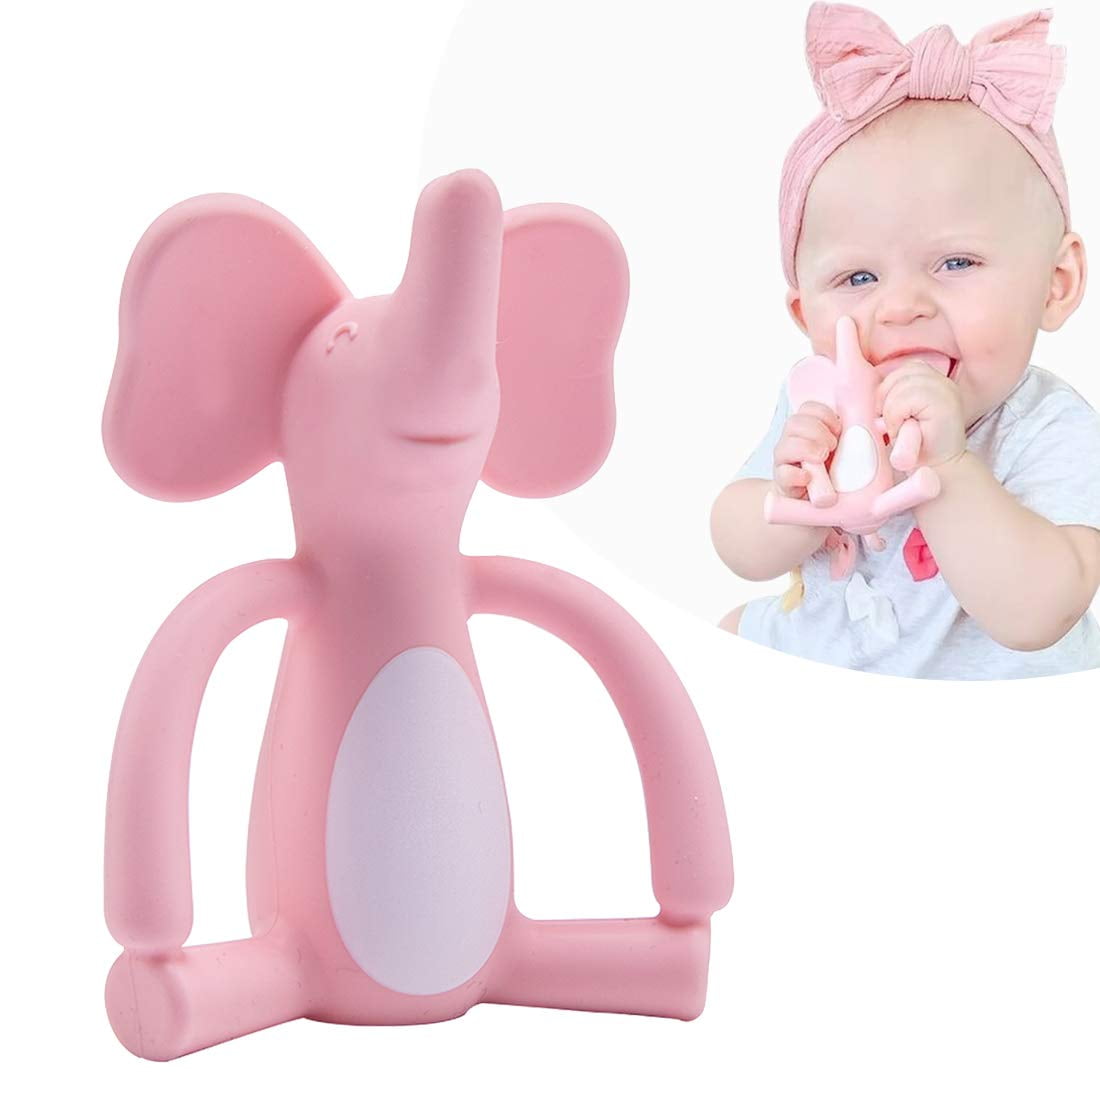 Baby Teether Elephant Silicone Pendant Teeth Bead Newborn Soothing Chew Toys S 